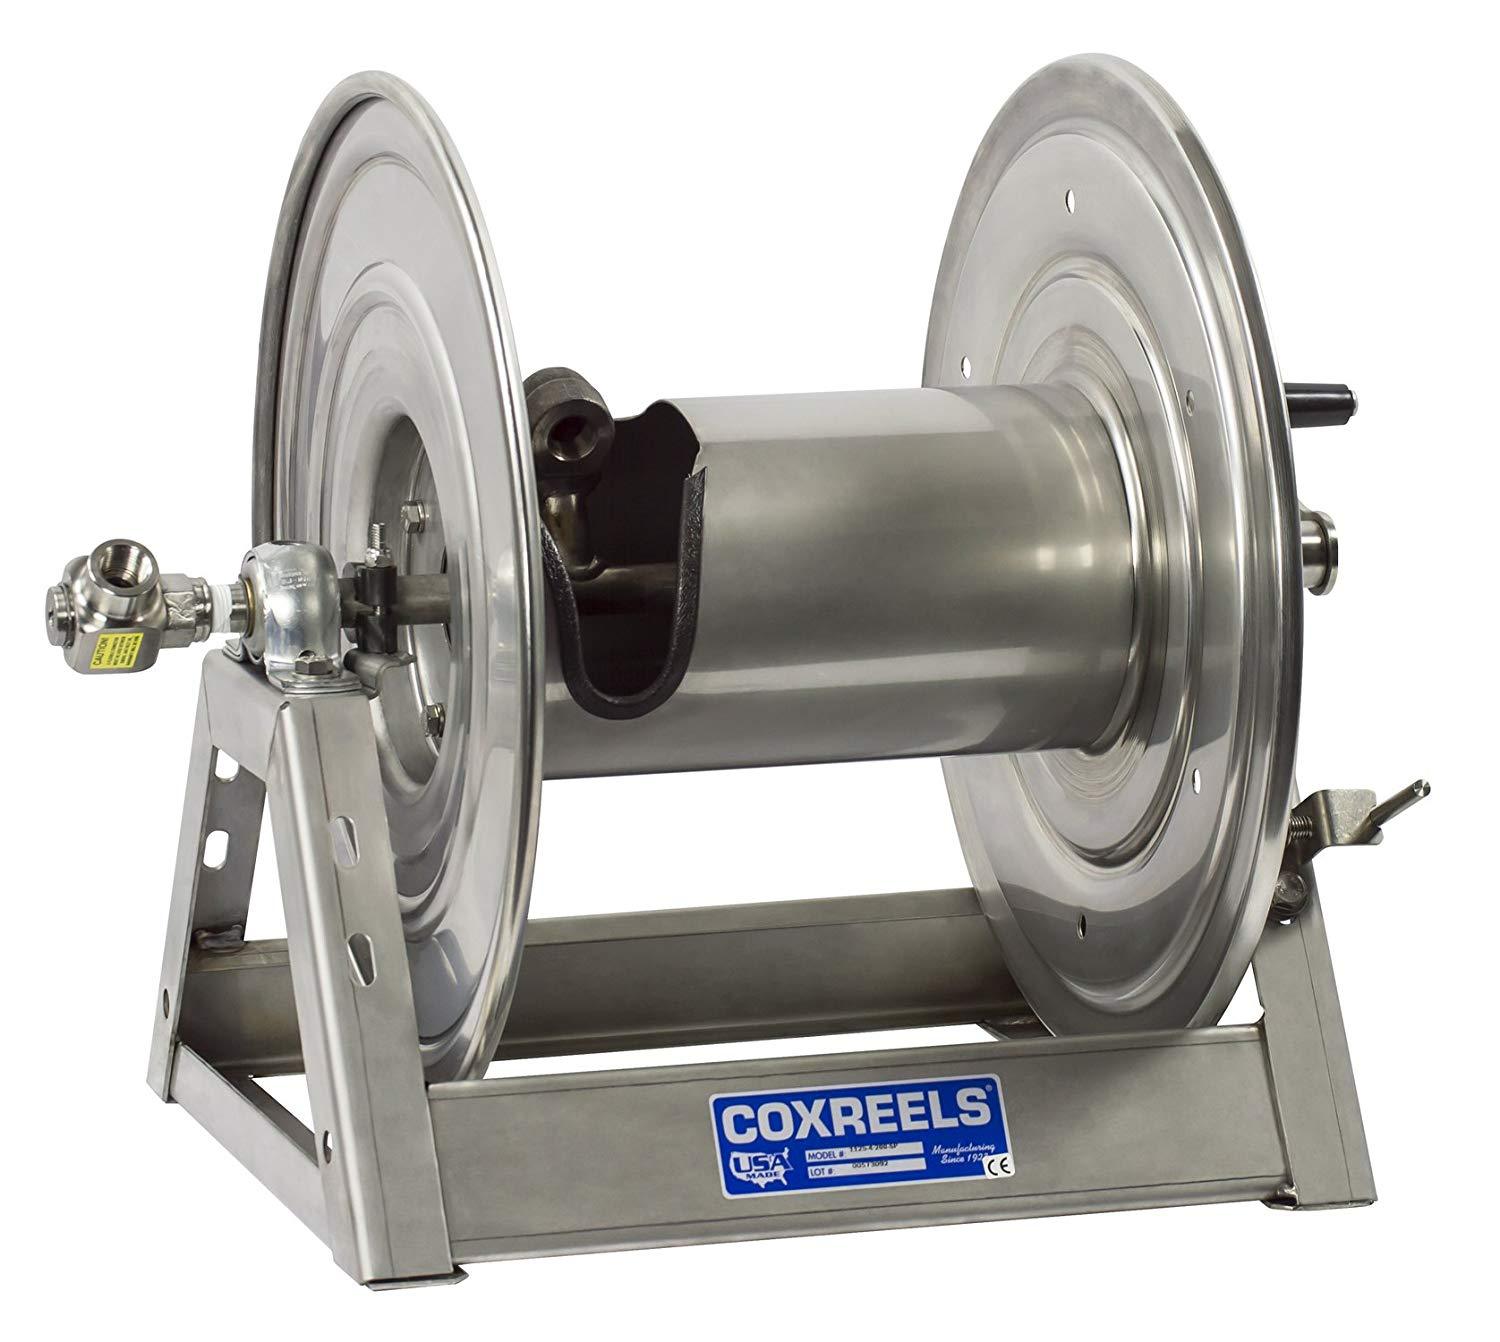 1125-5-100-SP : Coxreels 1125-5-100-SP Stainless Steel Hand Crank Hose Reel, 3/4" ID, 100' capacity, NO HOSE, 3000psi